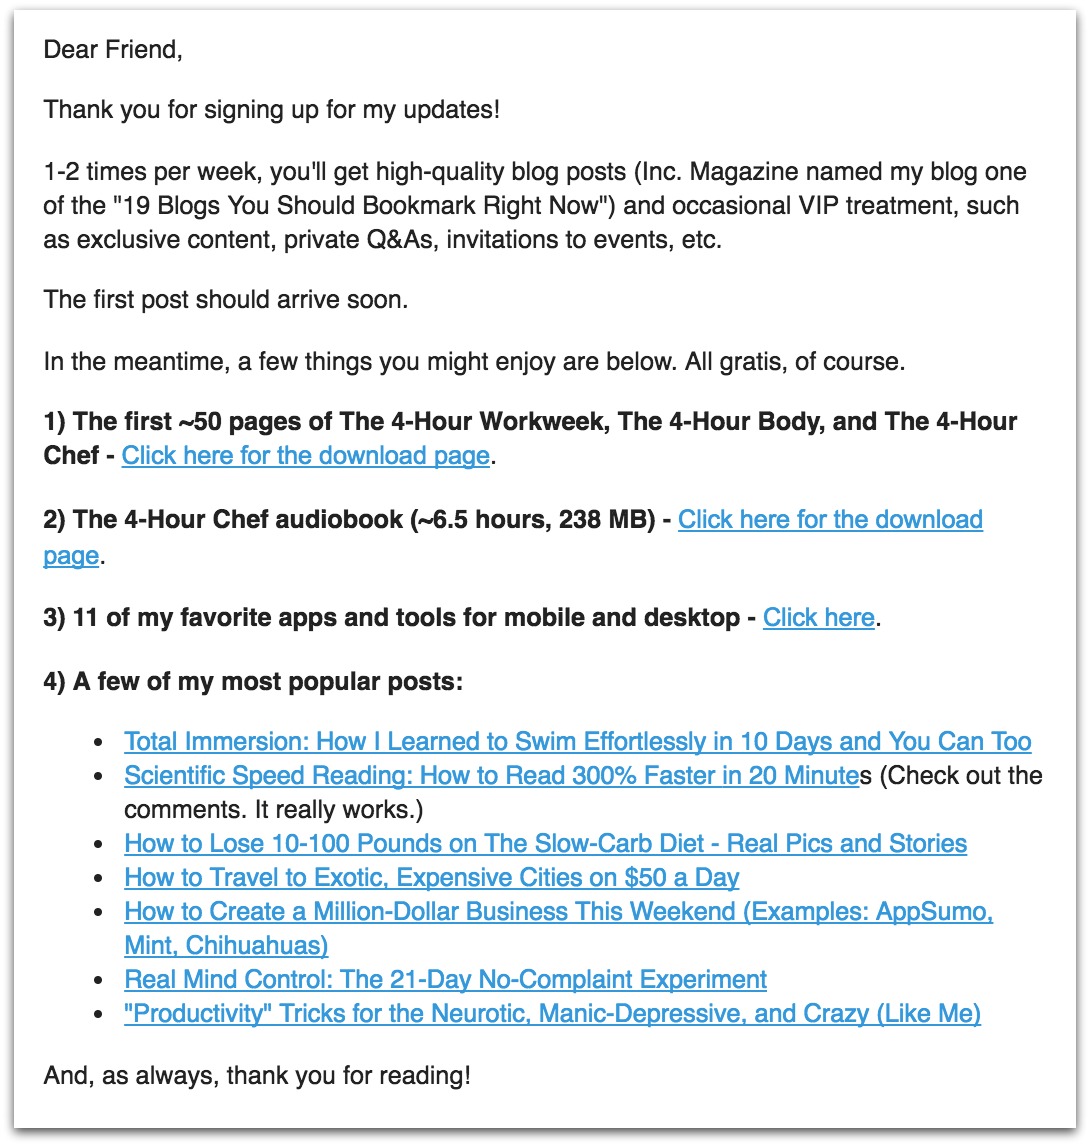 Screenshot of a welcome email sent by Tim Ferriss